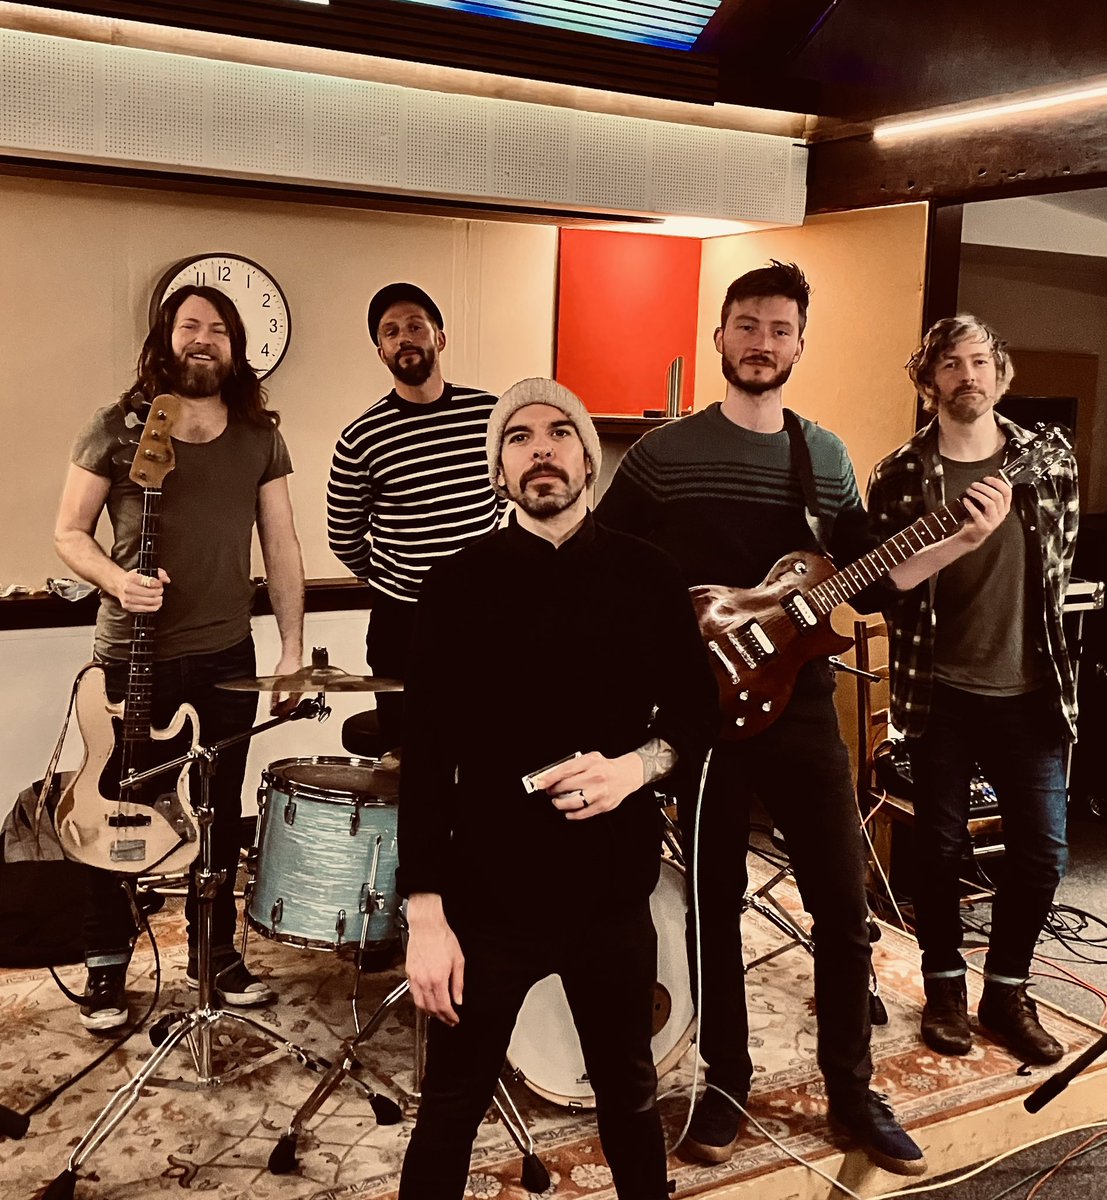 Last rehearsal in the bag ahead of this Saturdays gig at @welovelabelle 🔥 

We have a huge show planned for every1 in attendance! Still time to grab those tickets from @ticketsscotland 

We also still have a very limited amount of ticket/vinyl bundles left from @assai_edinburgh